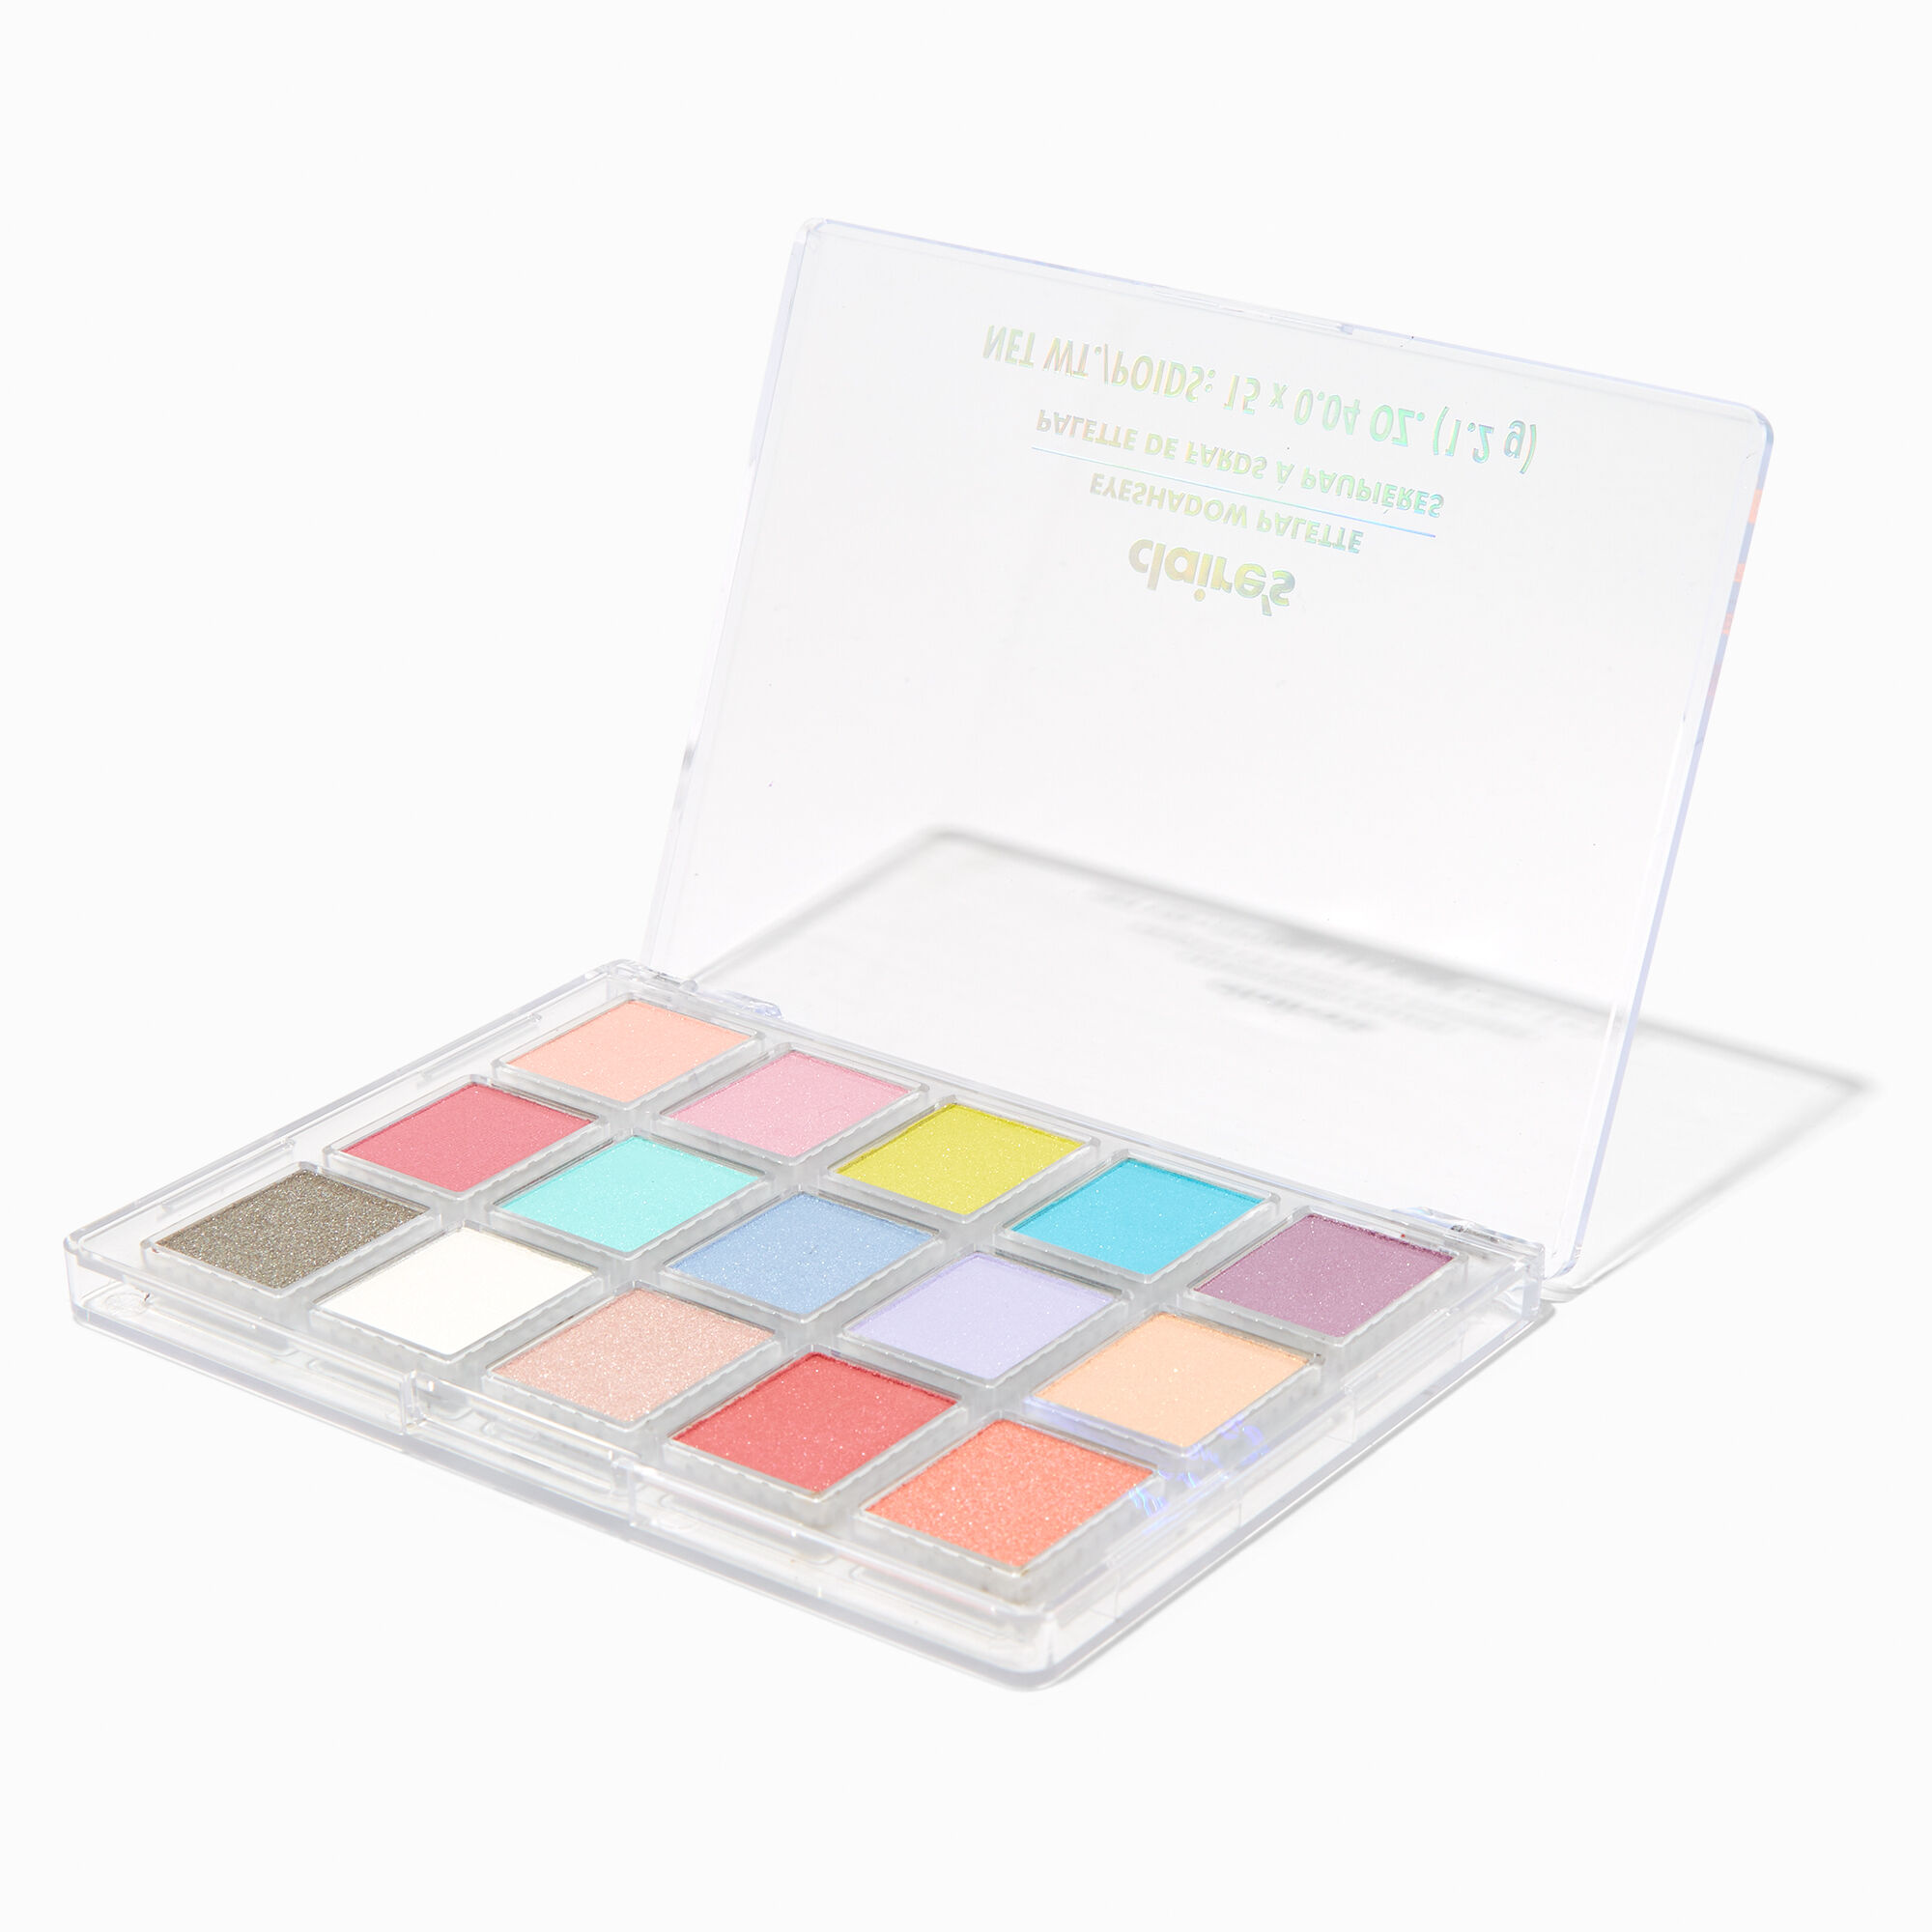 View Claires Pastel Shimmer Eyeshadow Palette Rainbow information